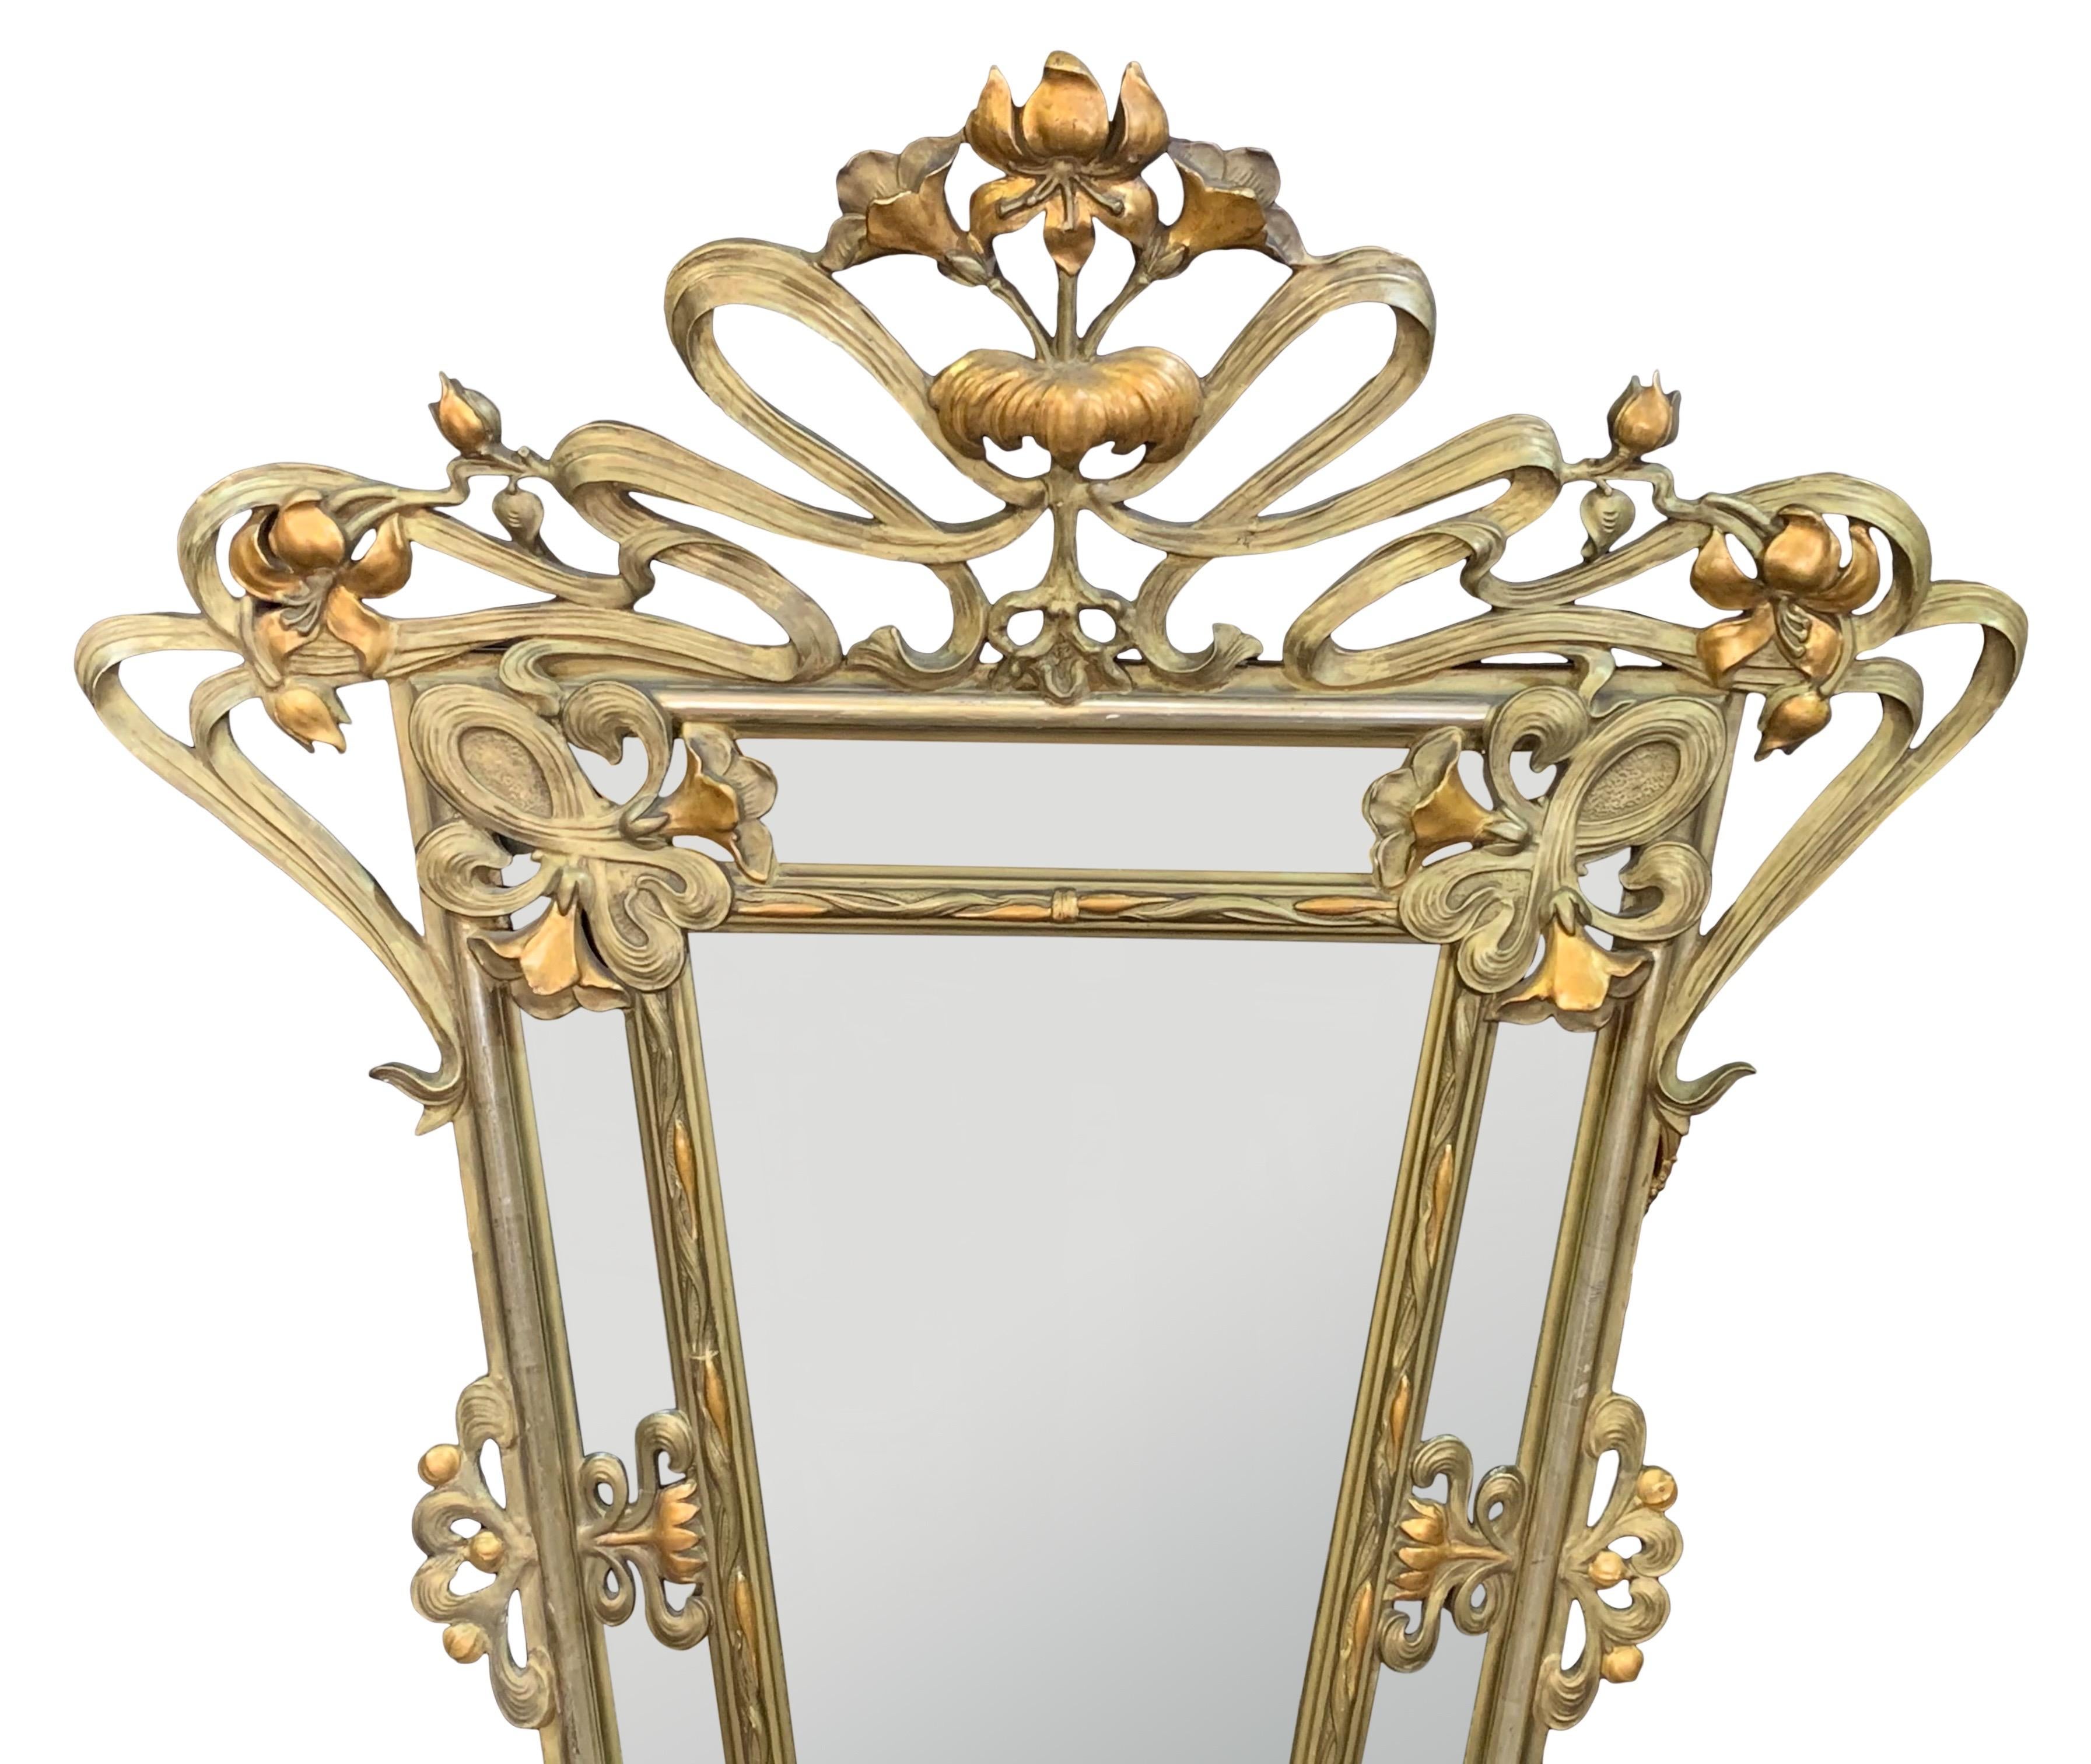 A Stunning French Art Nouveau hand carved giltwood mirror. Beautifully carved with lily flowers and scroll design.
Circa: 1900.

Art Nouveau is an ornamental style of art that flourished between about 1890 and 1910 throughout Europe and the United